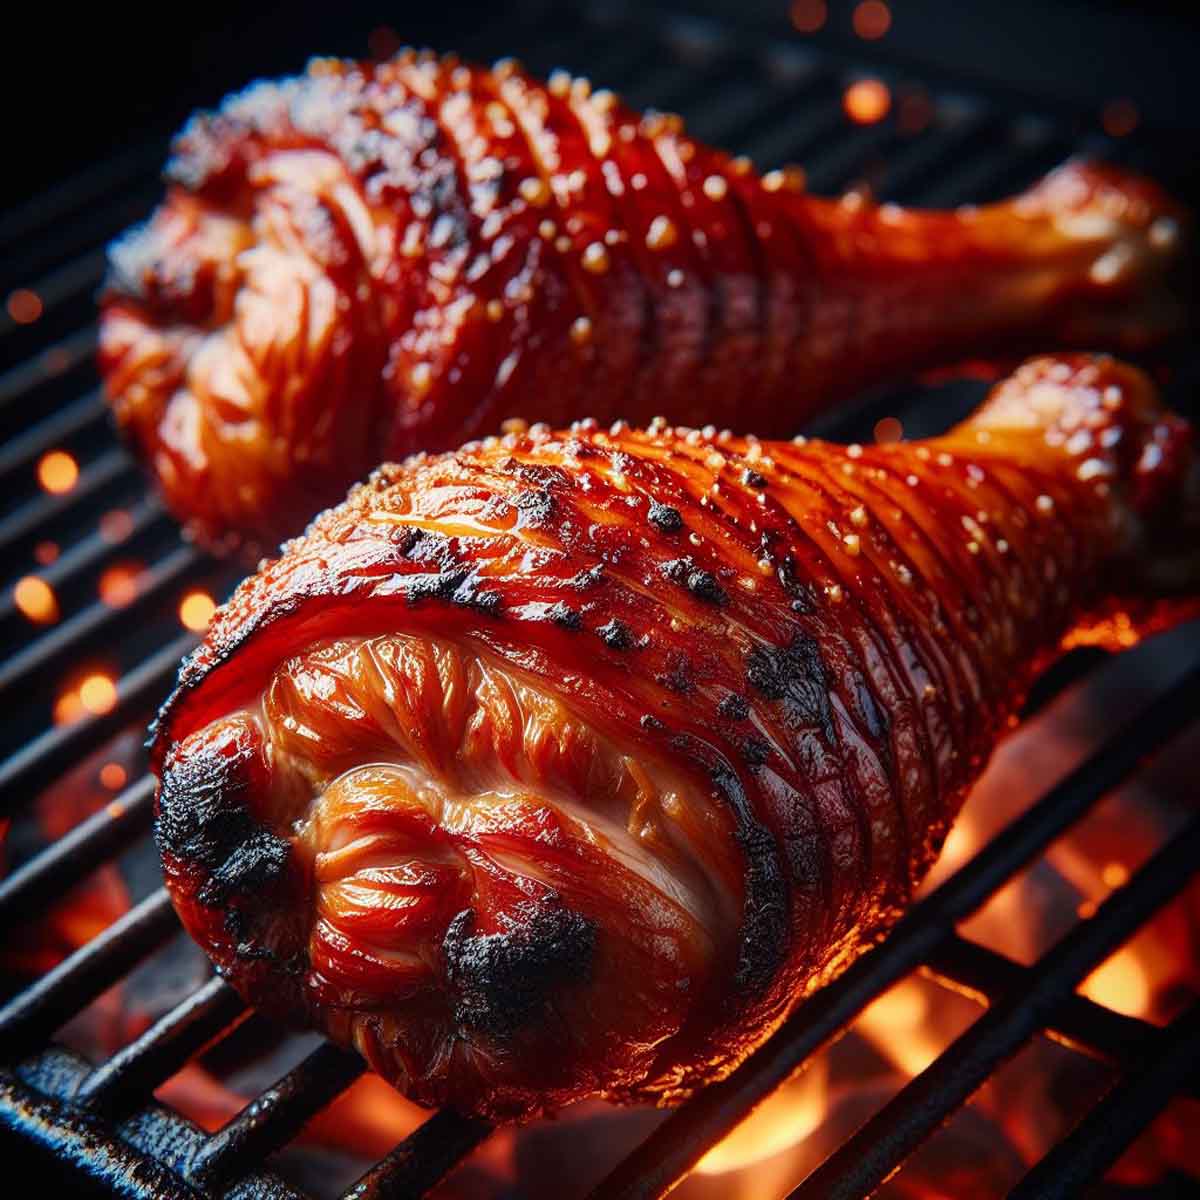 Close-up image of grilled turkey legs showing detailed texture of the crispy, charred skin.